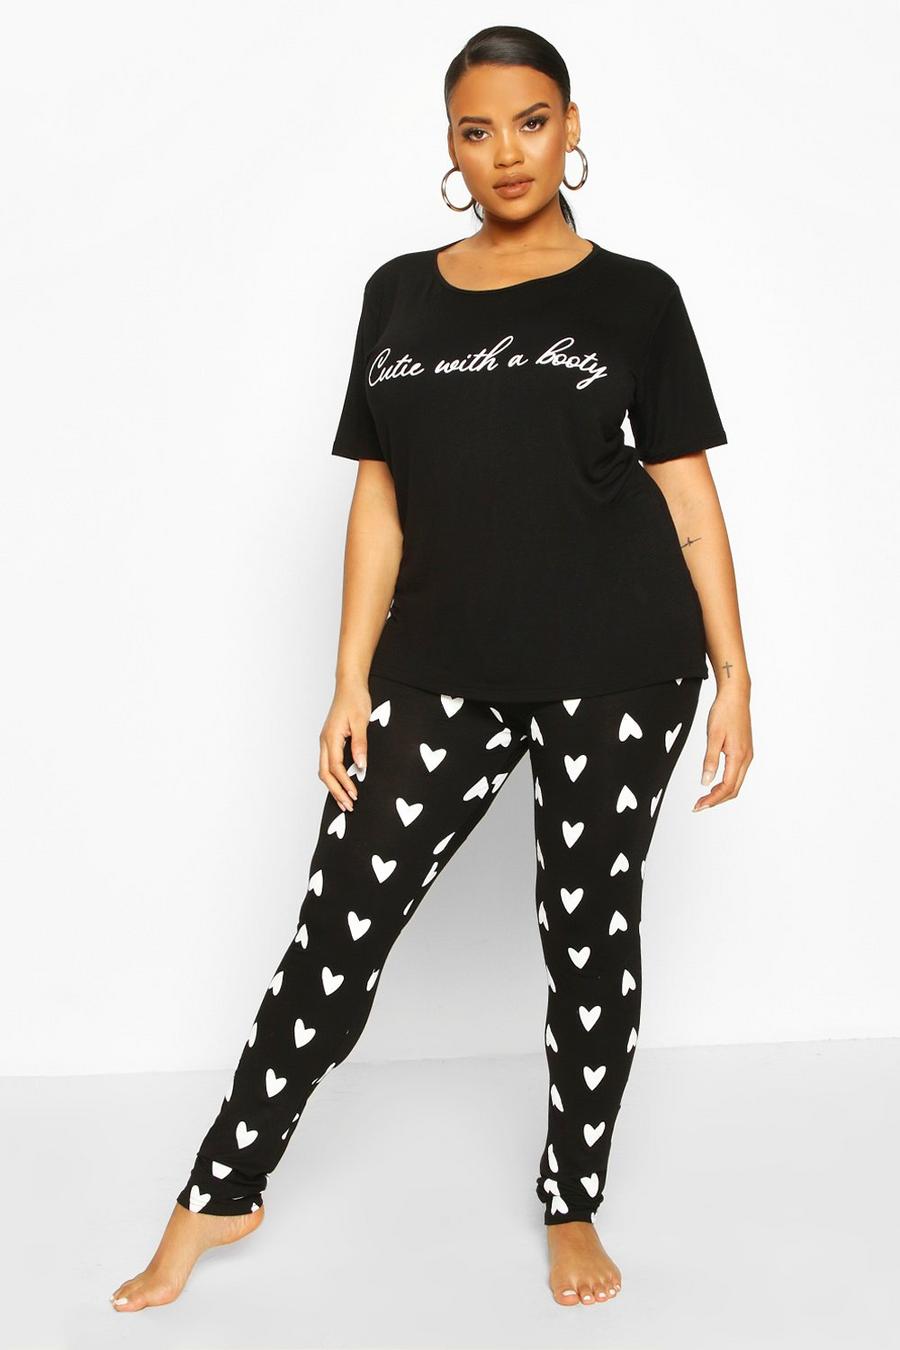 Black Plus 'Cutie With A Booty' Slogan Top & Heart Print Pants Pajama Set image number 1